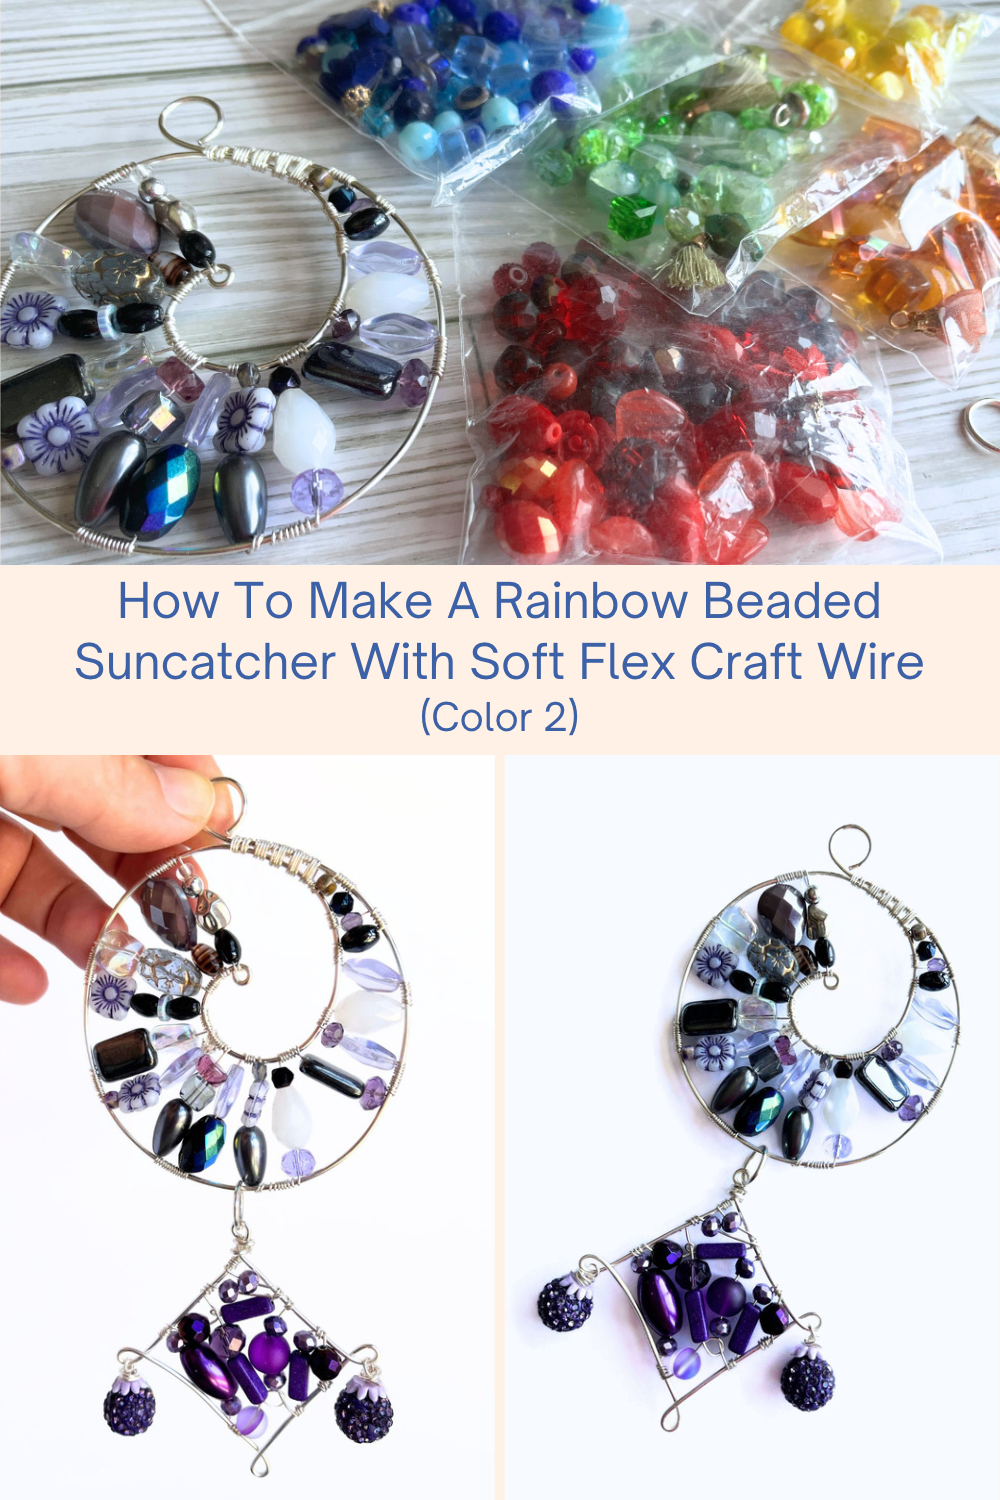 How To Make A Rainbow Beaded Suncatcher With Soft Flex Craft Wire (Color 2) Collage